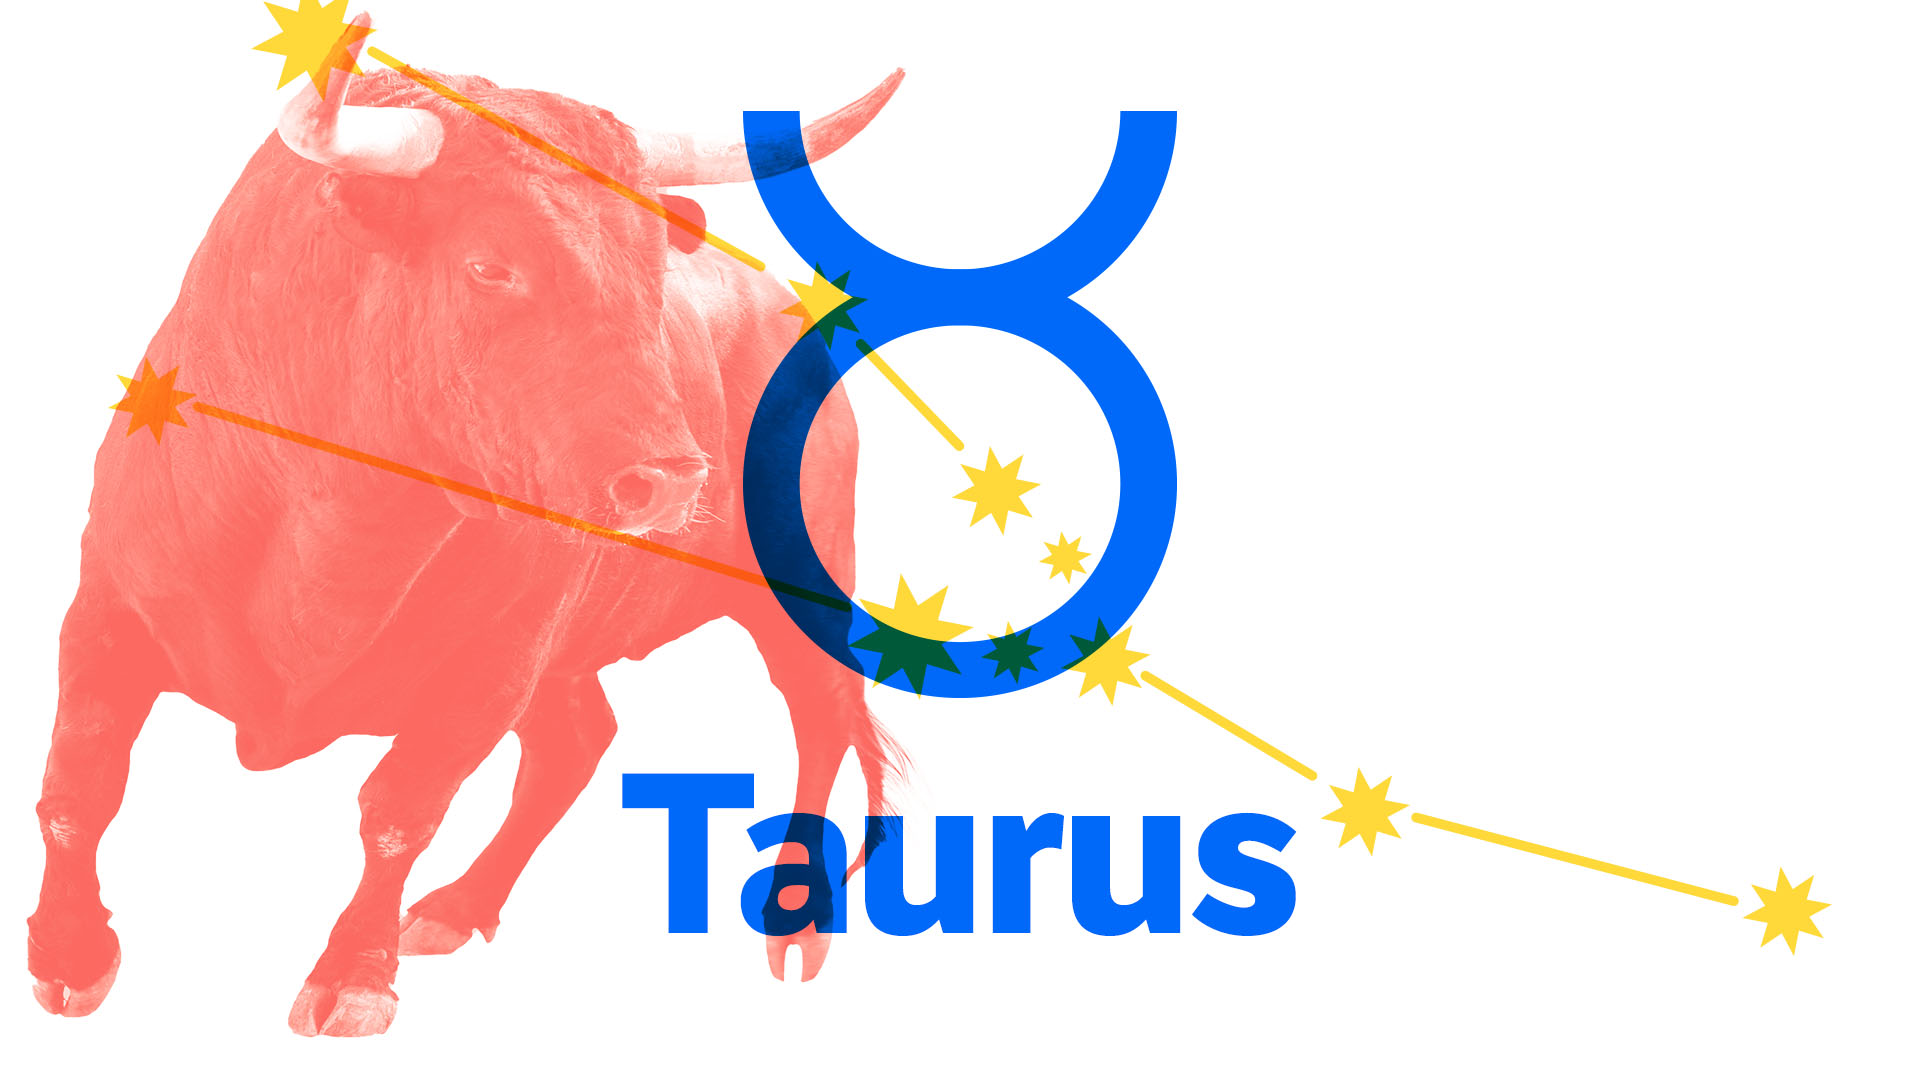 "Tenacious,” “Passionate,” And Other Words That Best Describe a Taurus